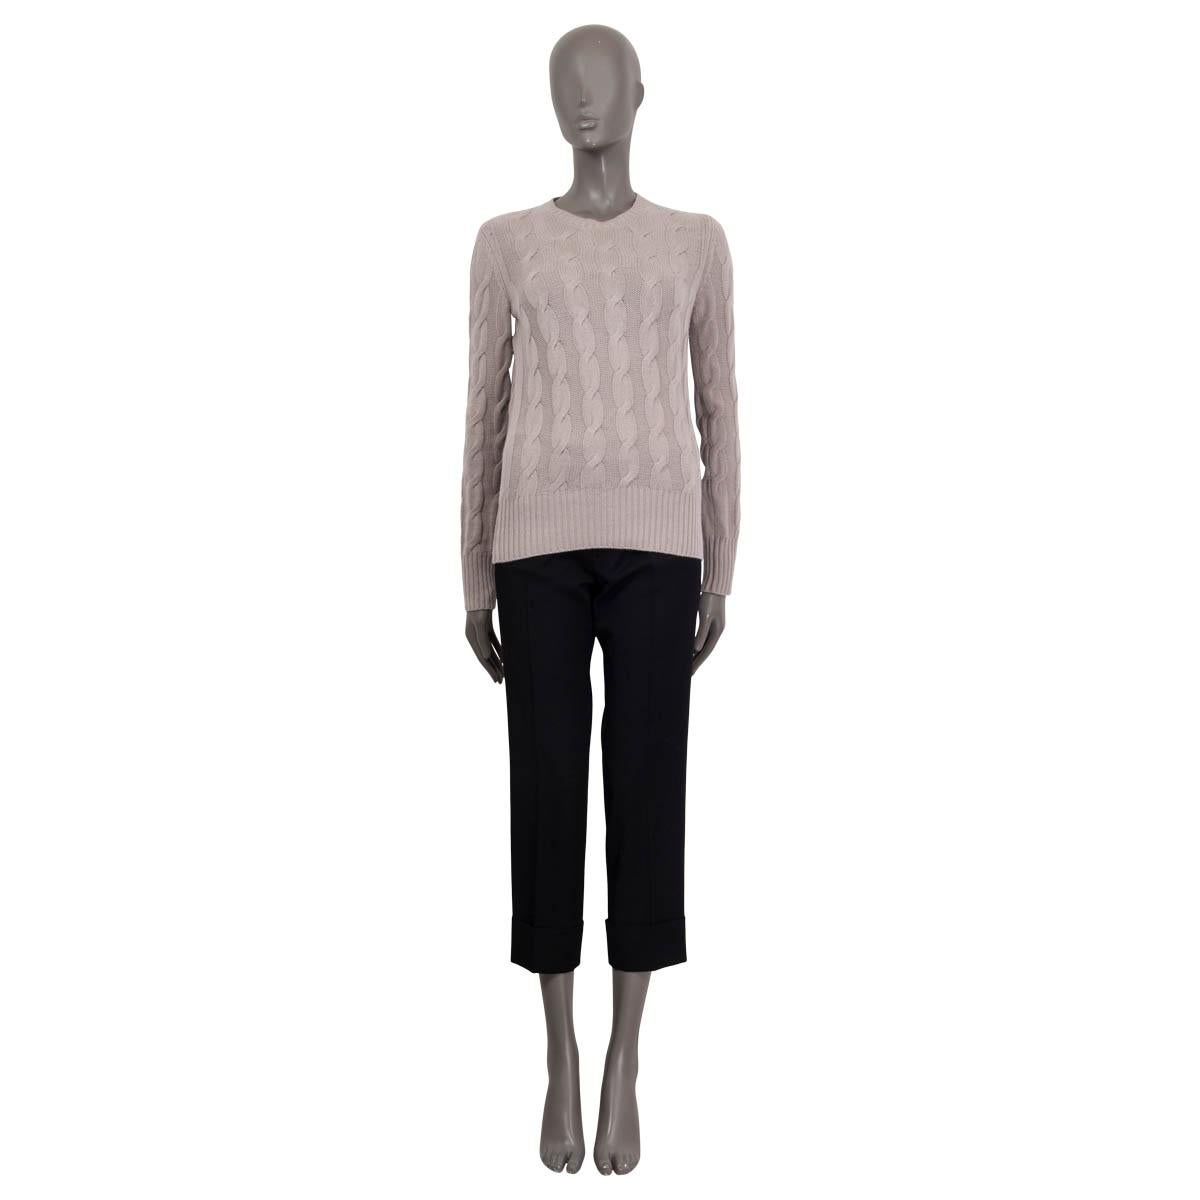 100% authentic Loro Piana sweater in dusty rose baby cashmere (100%). Features a round neck. Unlined. Has been worn and is in excellent condition.

Measurements
Tag Size	42
Size	M
Shoulder Width	38cm (14.8in)
Bust	96cm (37.4in) to 122cm